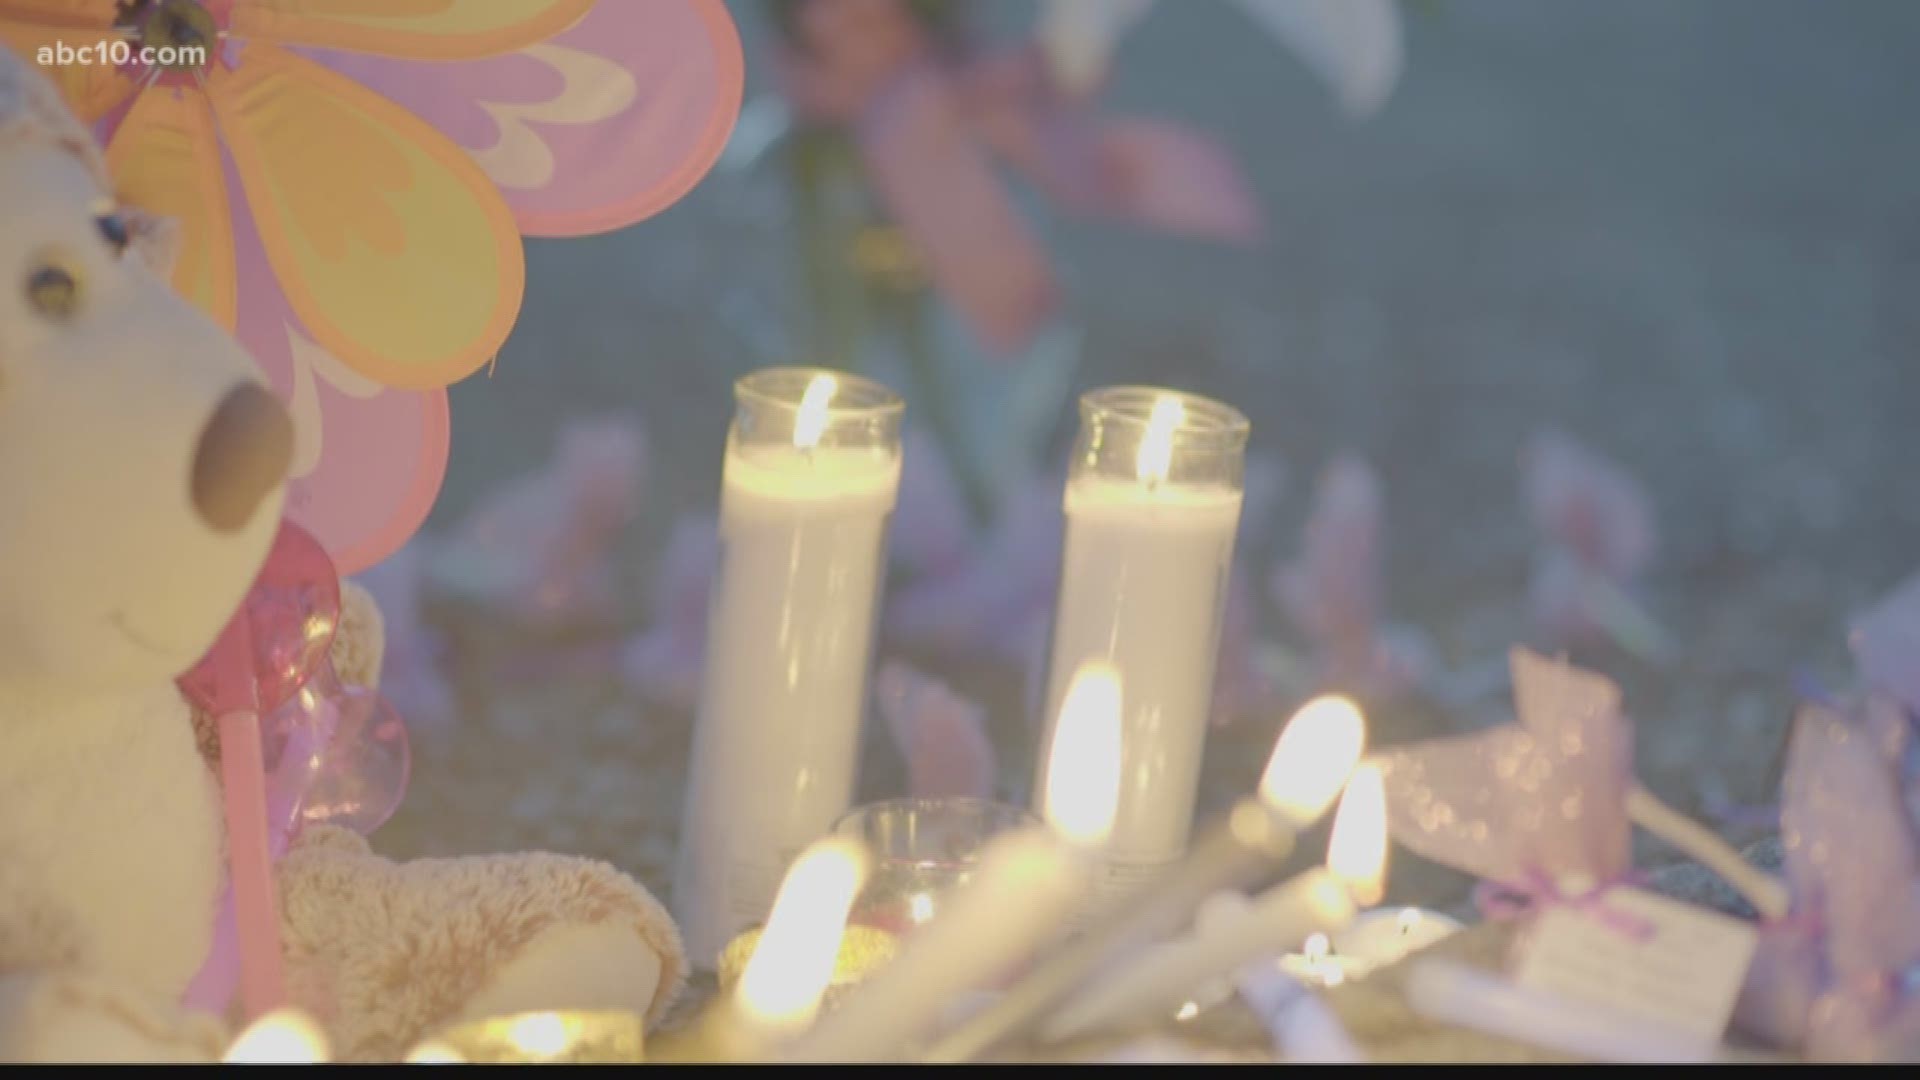 A vigil was held Wednesday for a 5-year-old girl found dead in a storage unit.